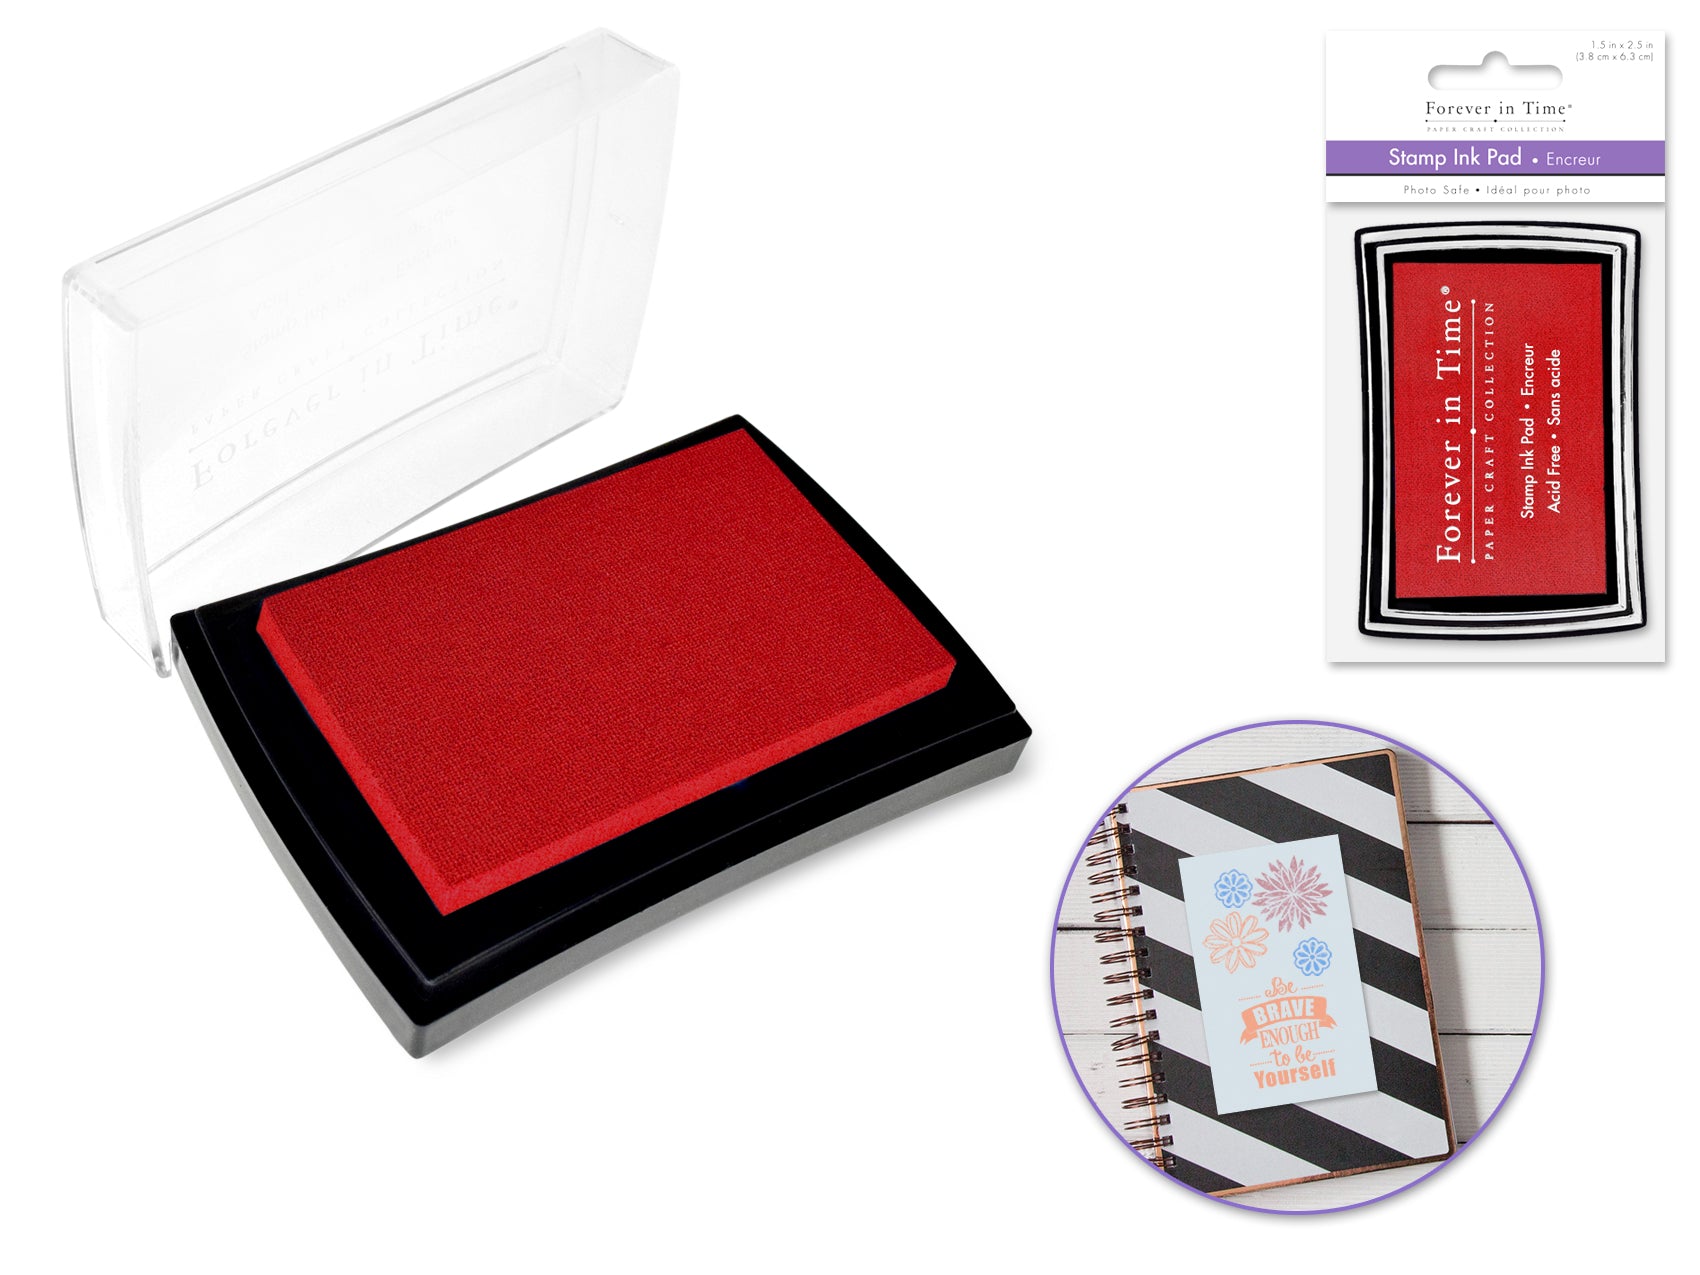 the 1.5"x2.5" Really Red Pigment Solid Color Acid-Free Stamp Ink Pad